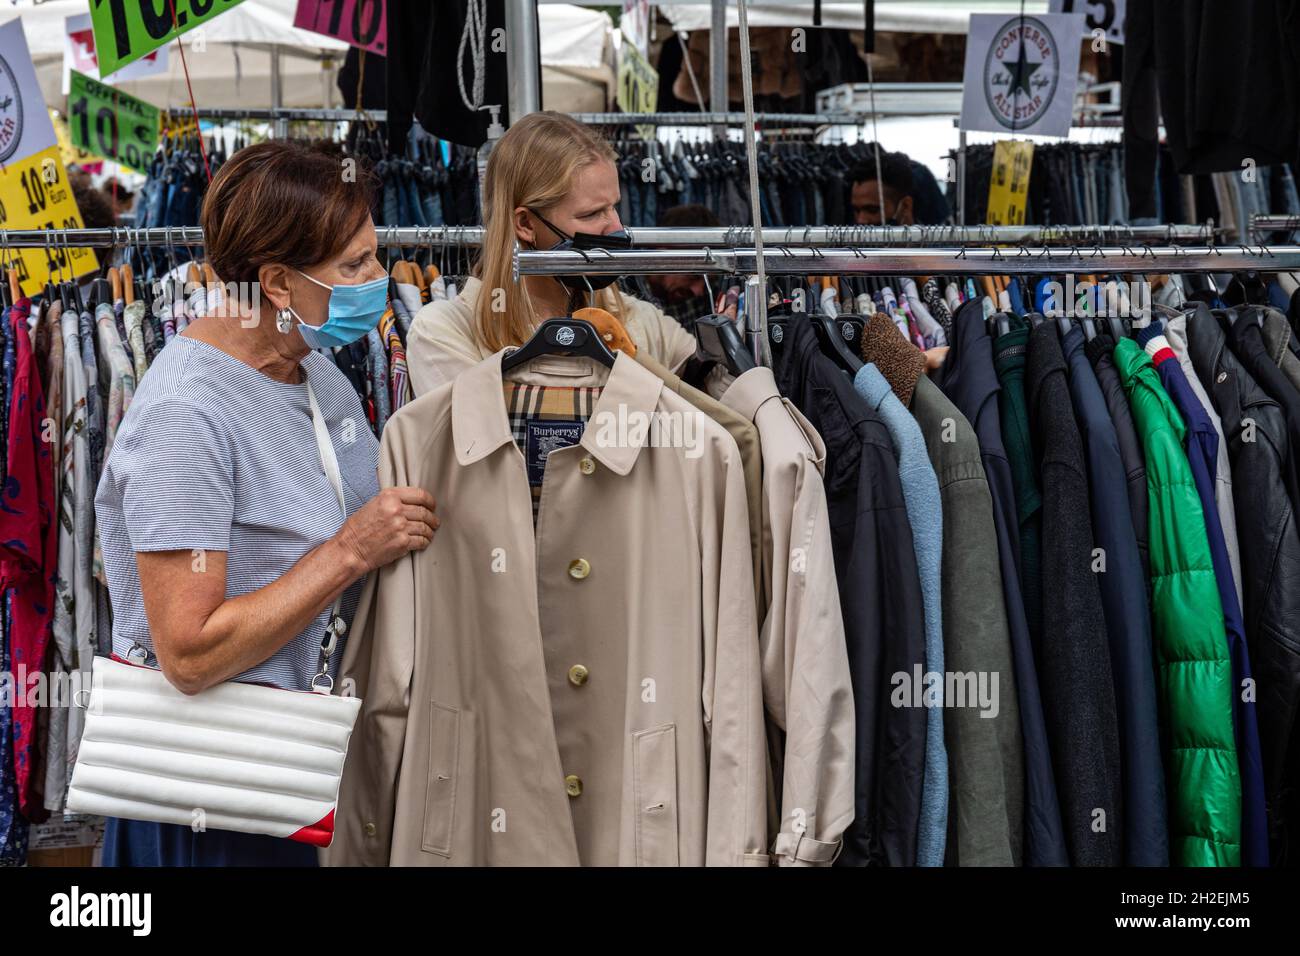 Women browsing rack of overcoats at Mercato di Porta Portese second-hand street market in Trastevere district of Rome, Italy Stock Photo